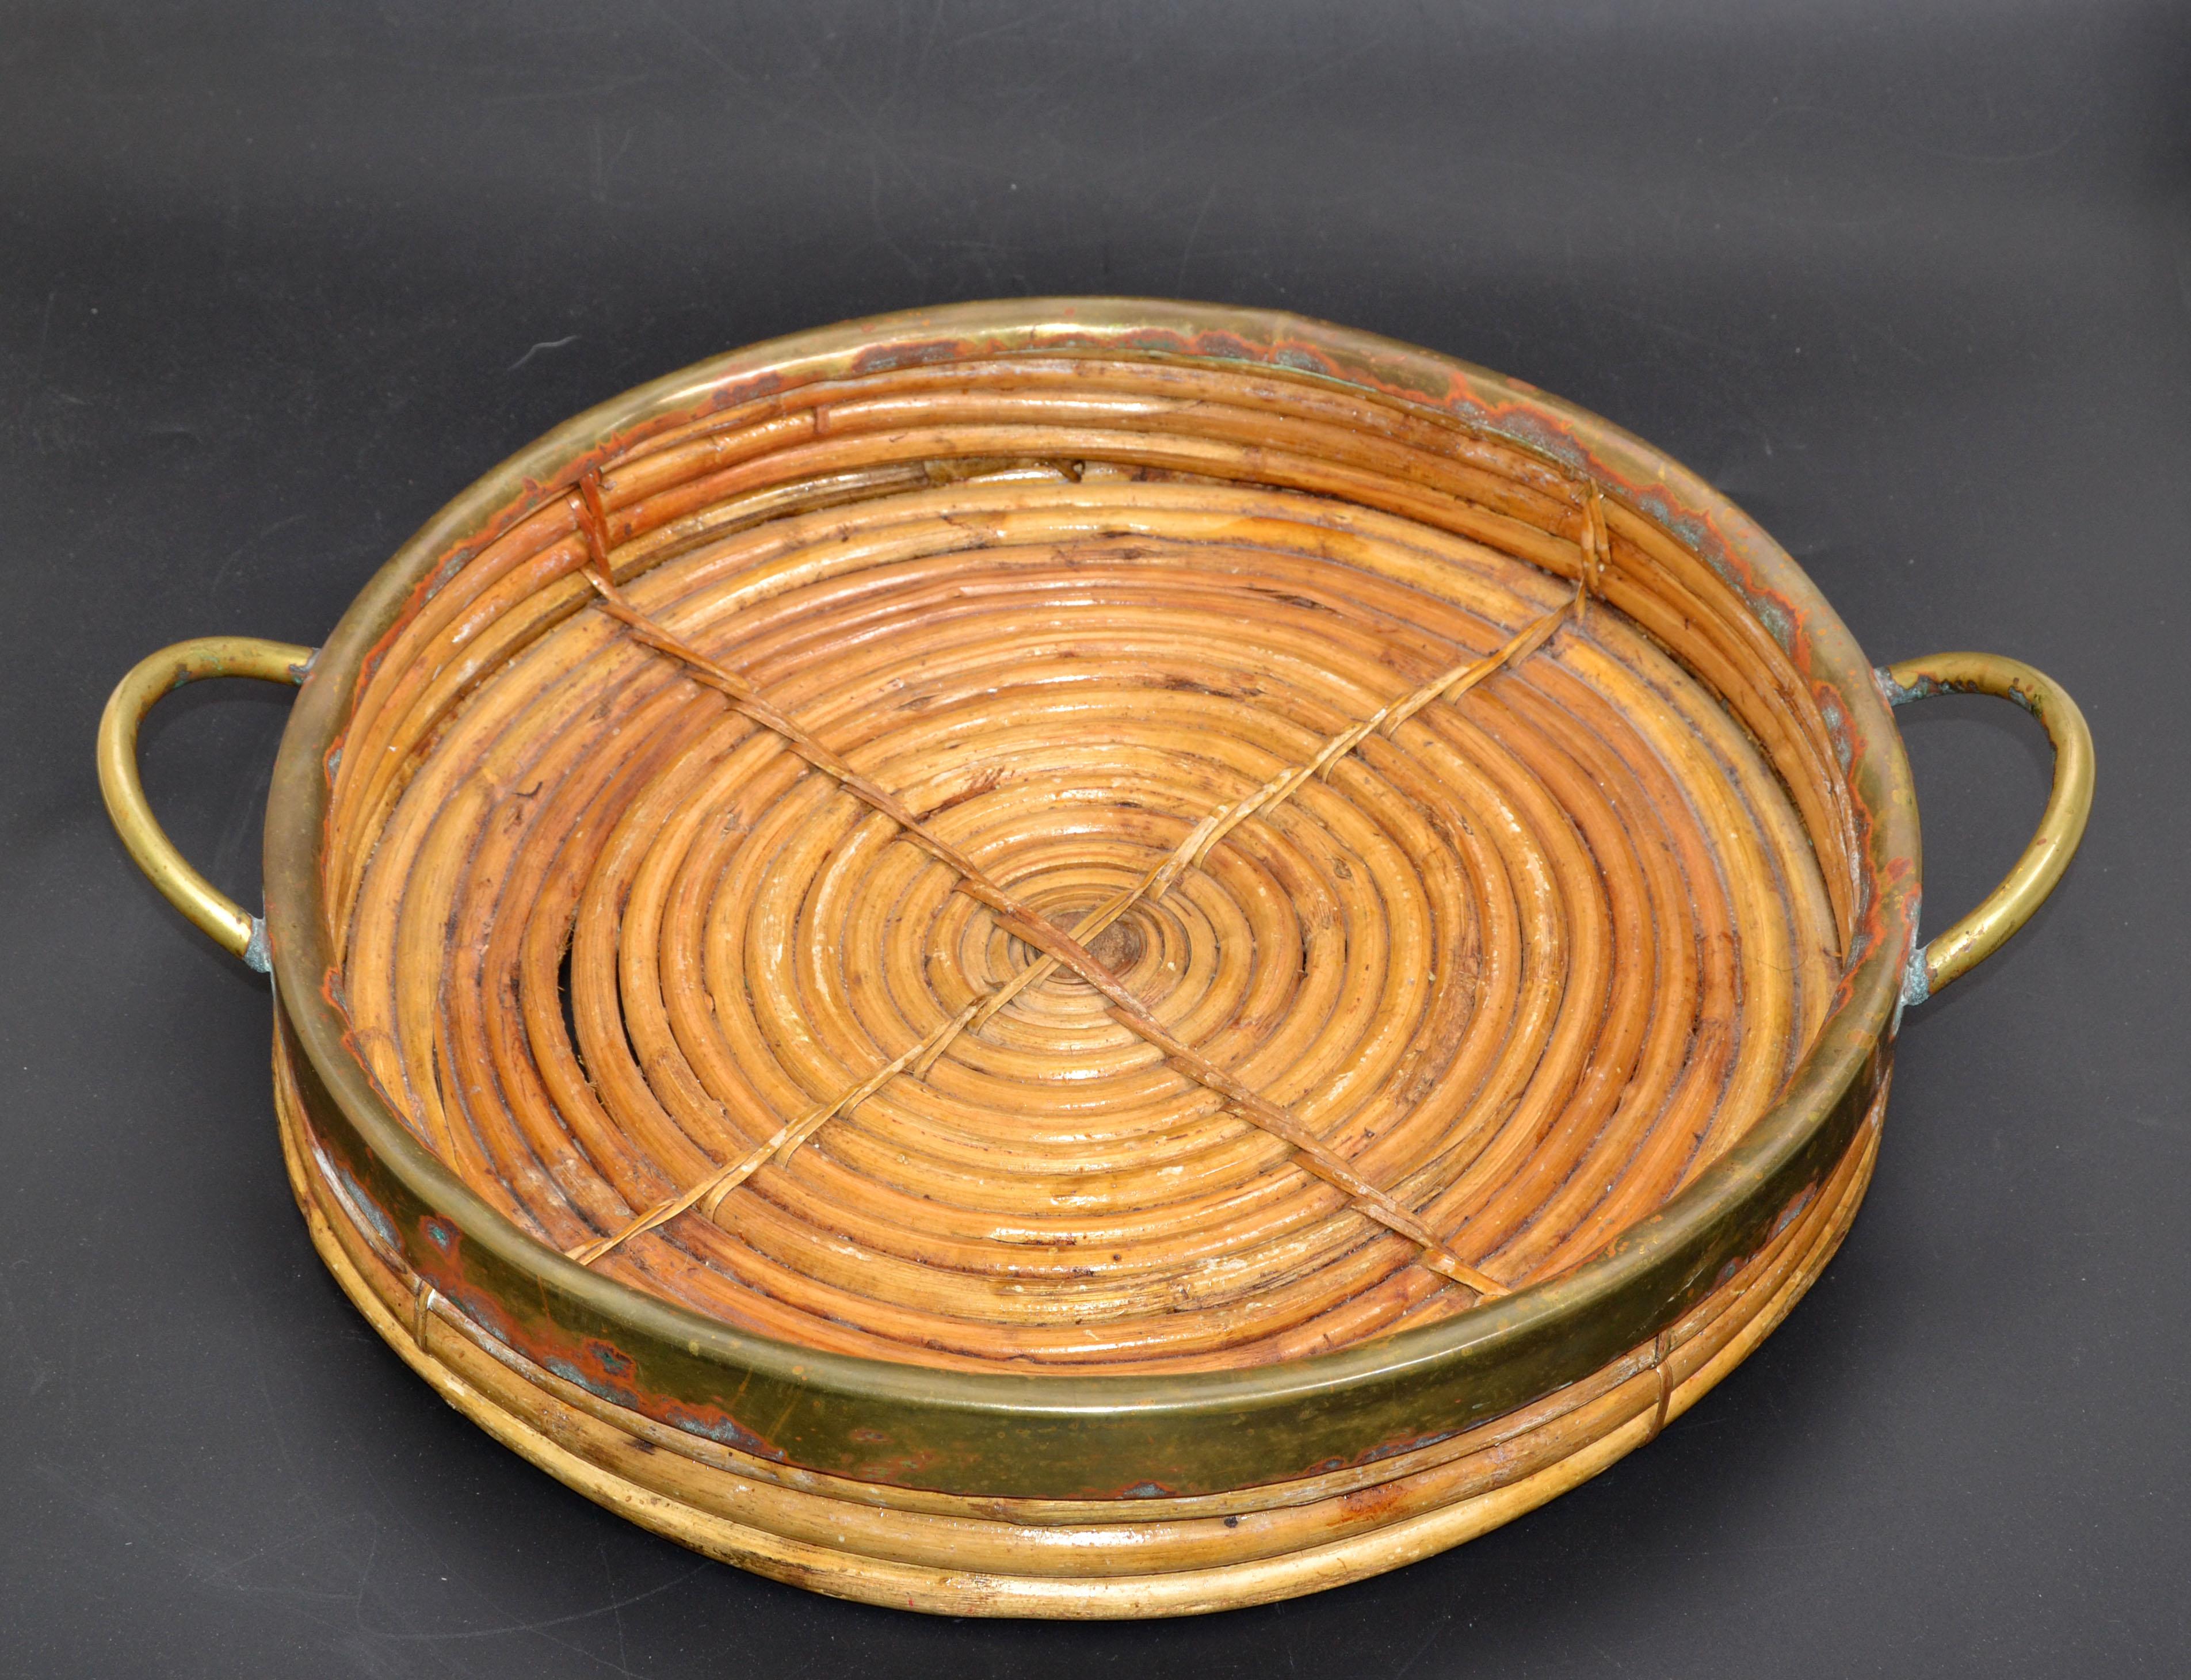 American 1950s Bohemian Handcrafted Round Bamboo Wood & Brass Serving Tray Handles